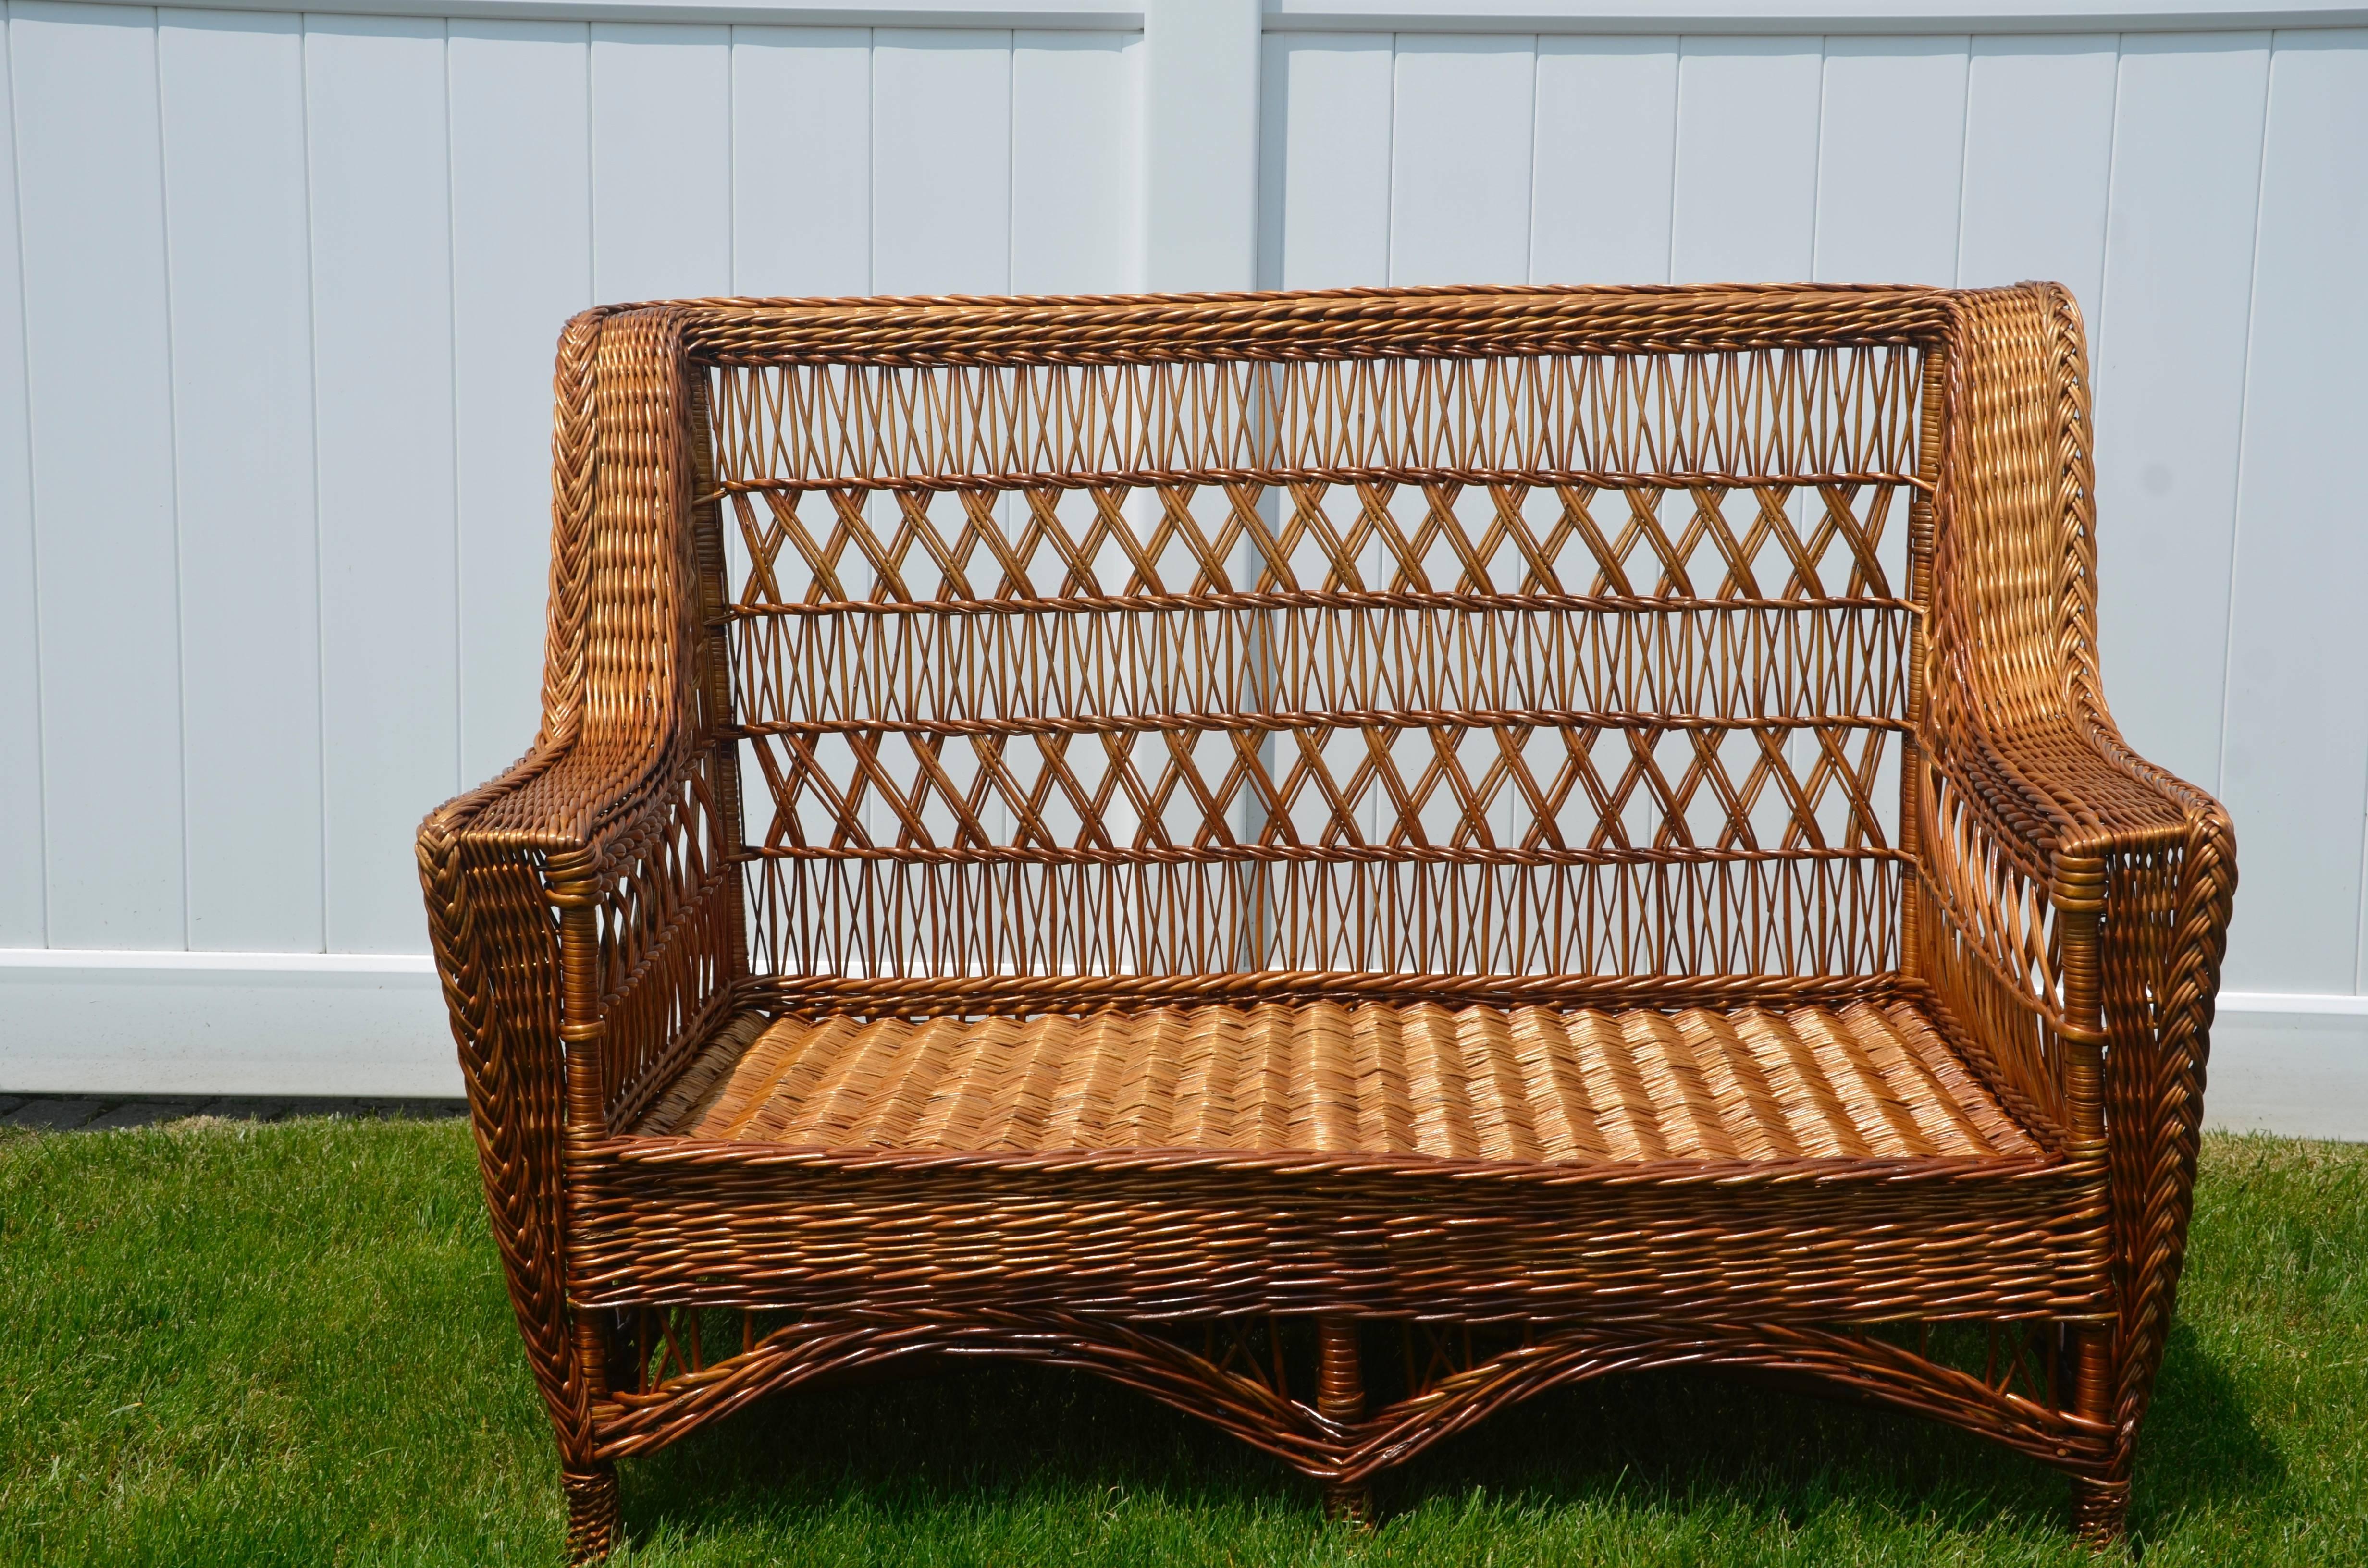 An immaculate, antique willow settee made by Paine Furniture implementing the triple cross pattern. This is a scarcely seen item in outstanding condition.